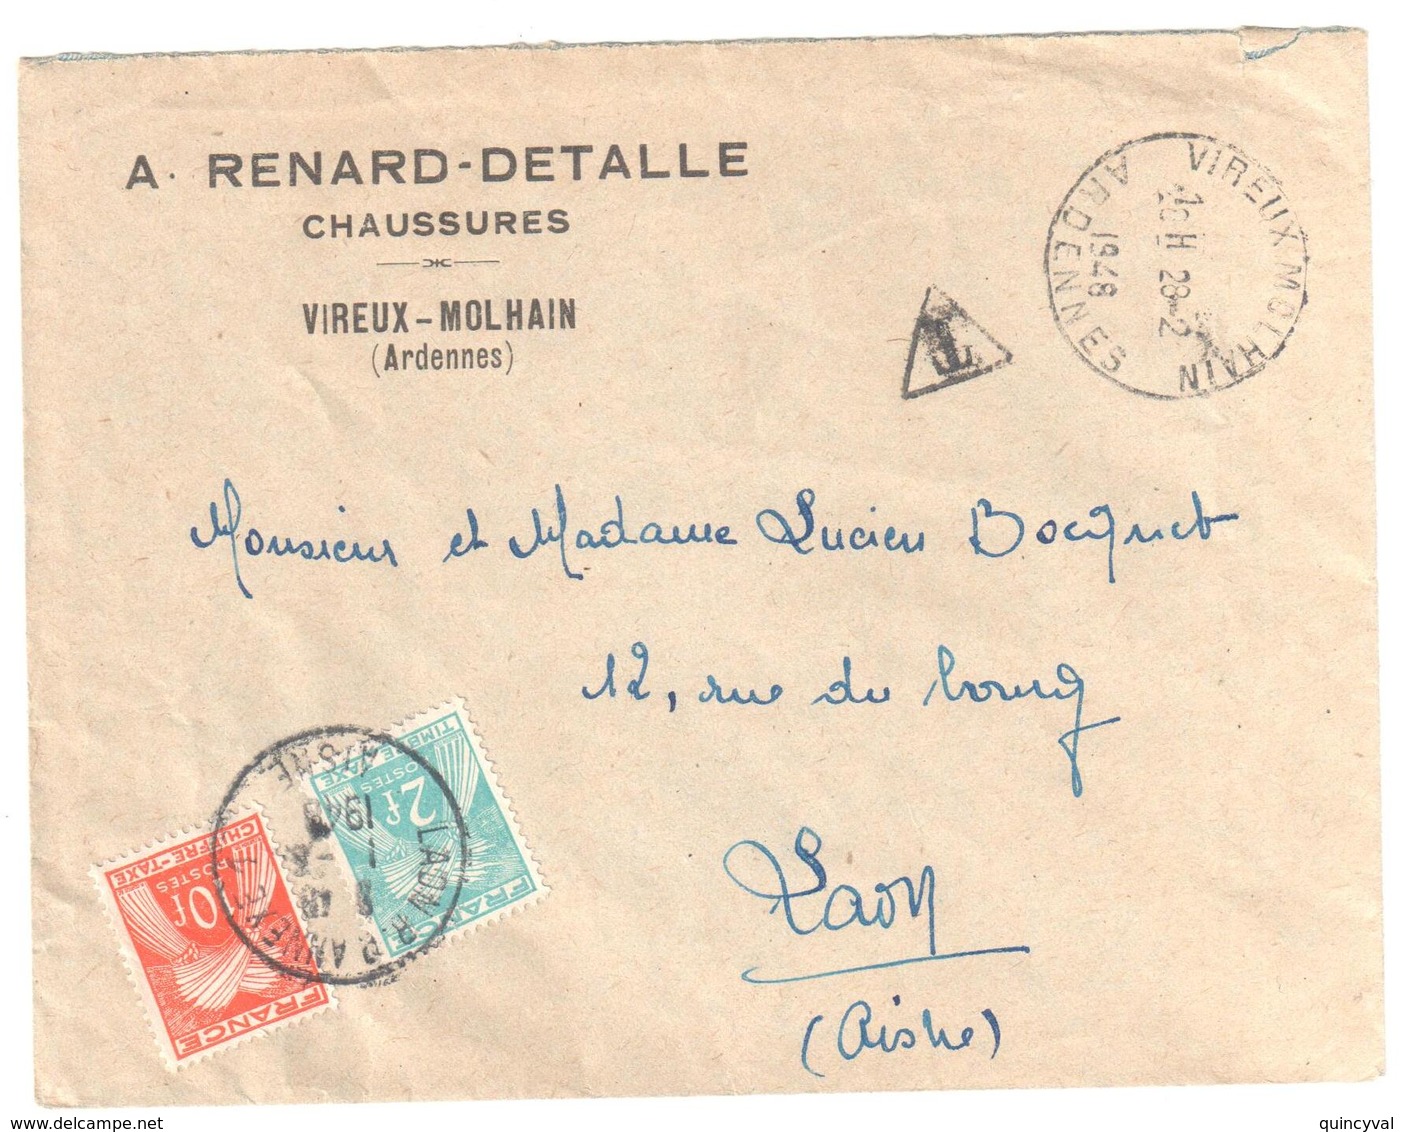 VIREUX MORLHAN Ardennes Lettre Entête Chaussure Tf  8/7/1947 6F Non Affranchie Taxe Double Insuffisance 12 F Yv T 76 82 - 1859-1959 Lettres & Documents